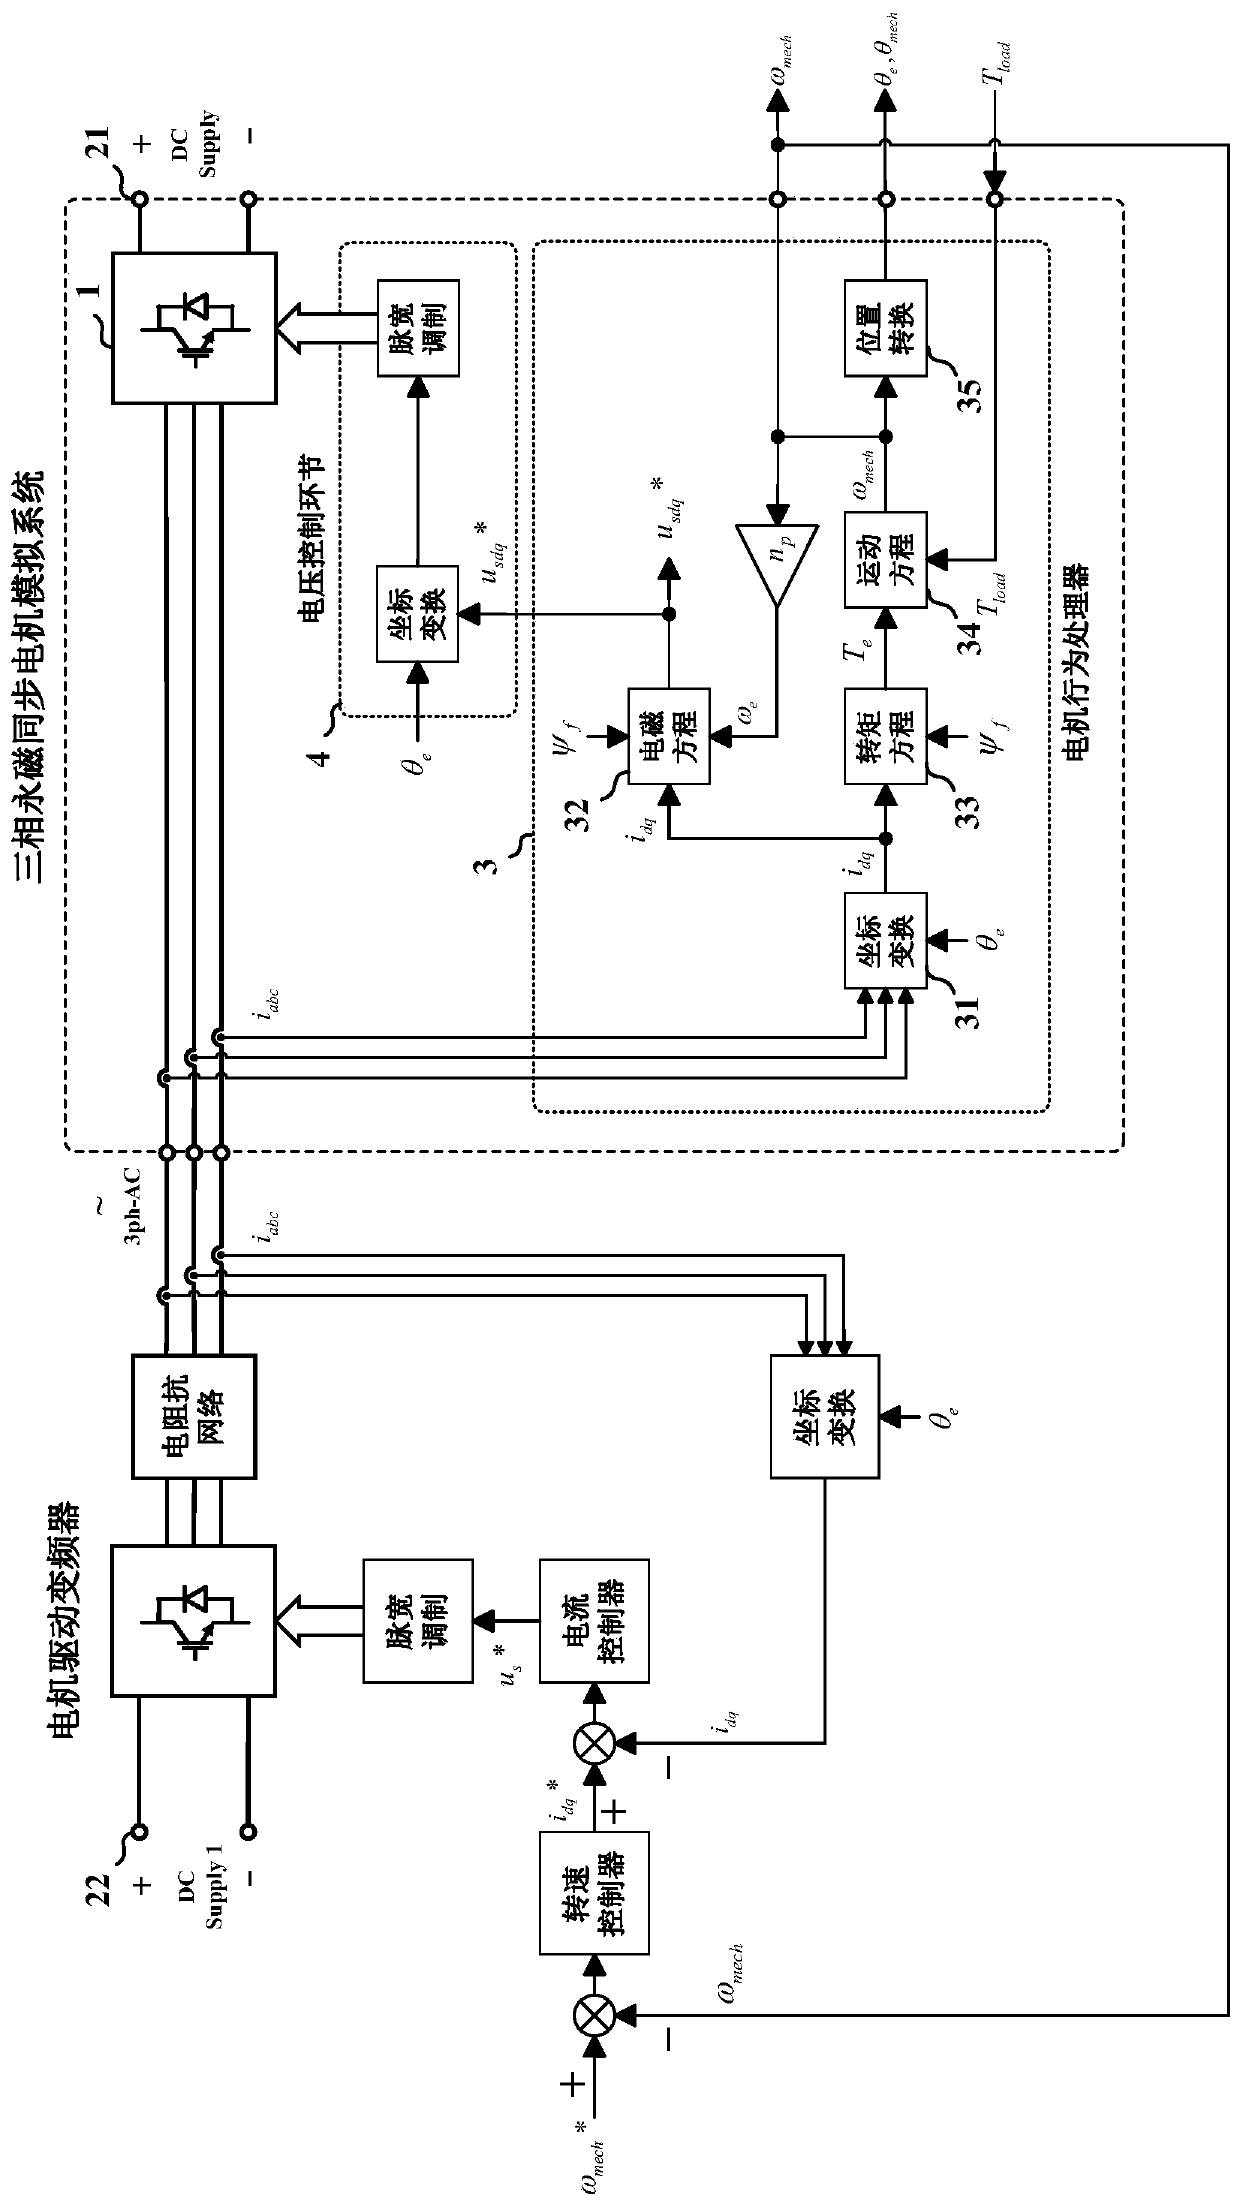 Simulation System of Voltage Response Type Three-phase Permanent Magnet Synchronous Motor